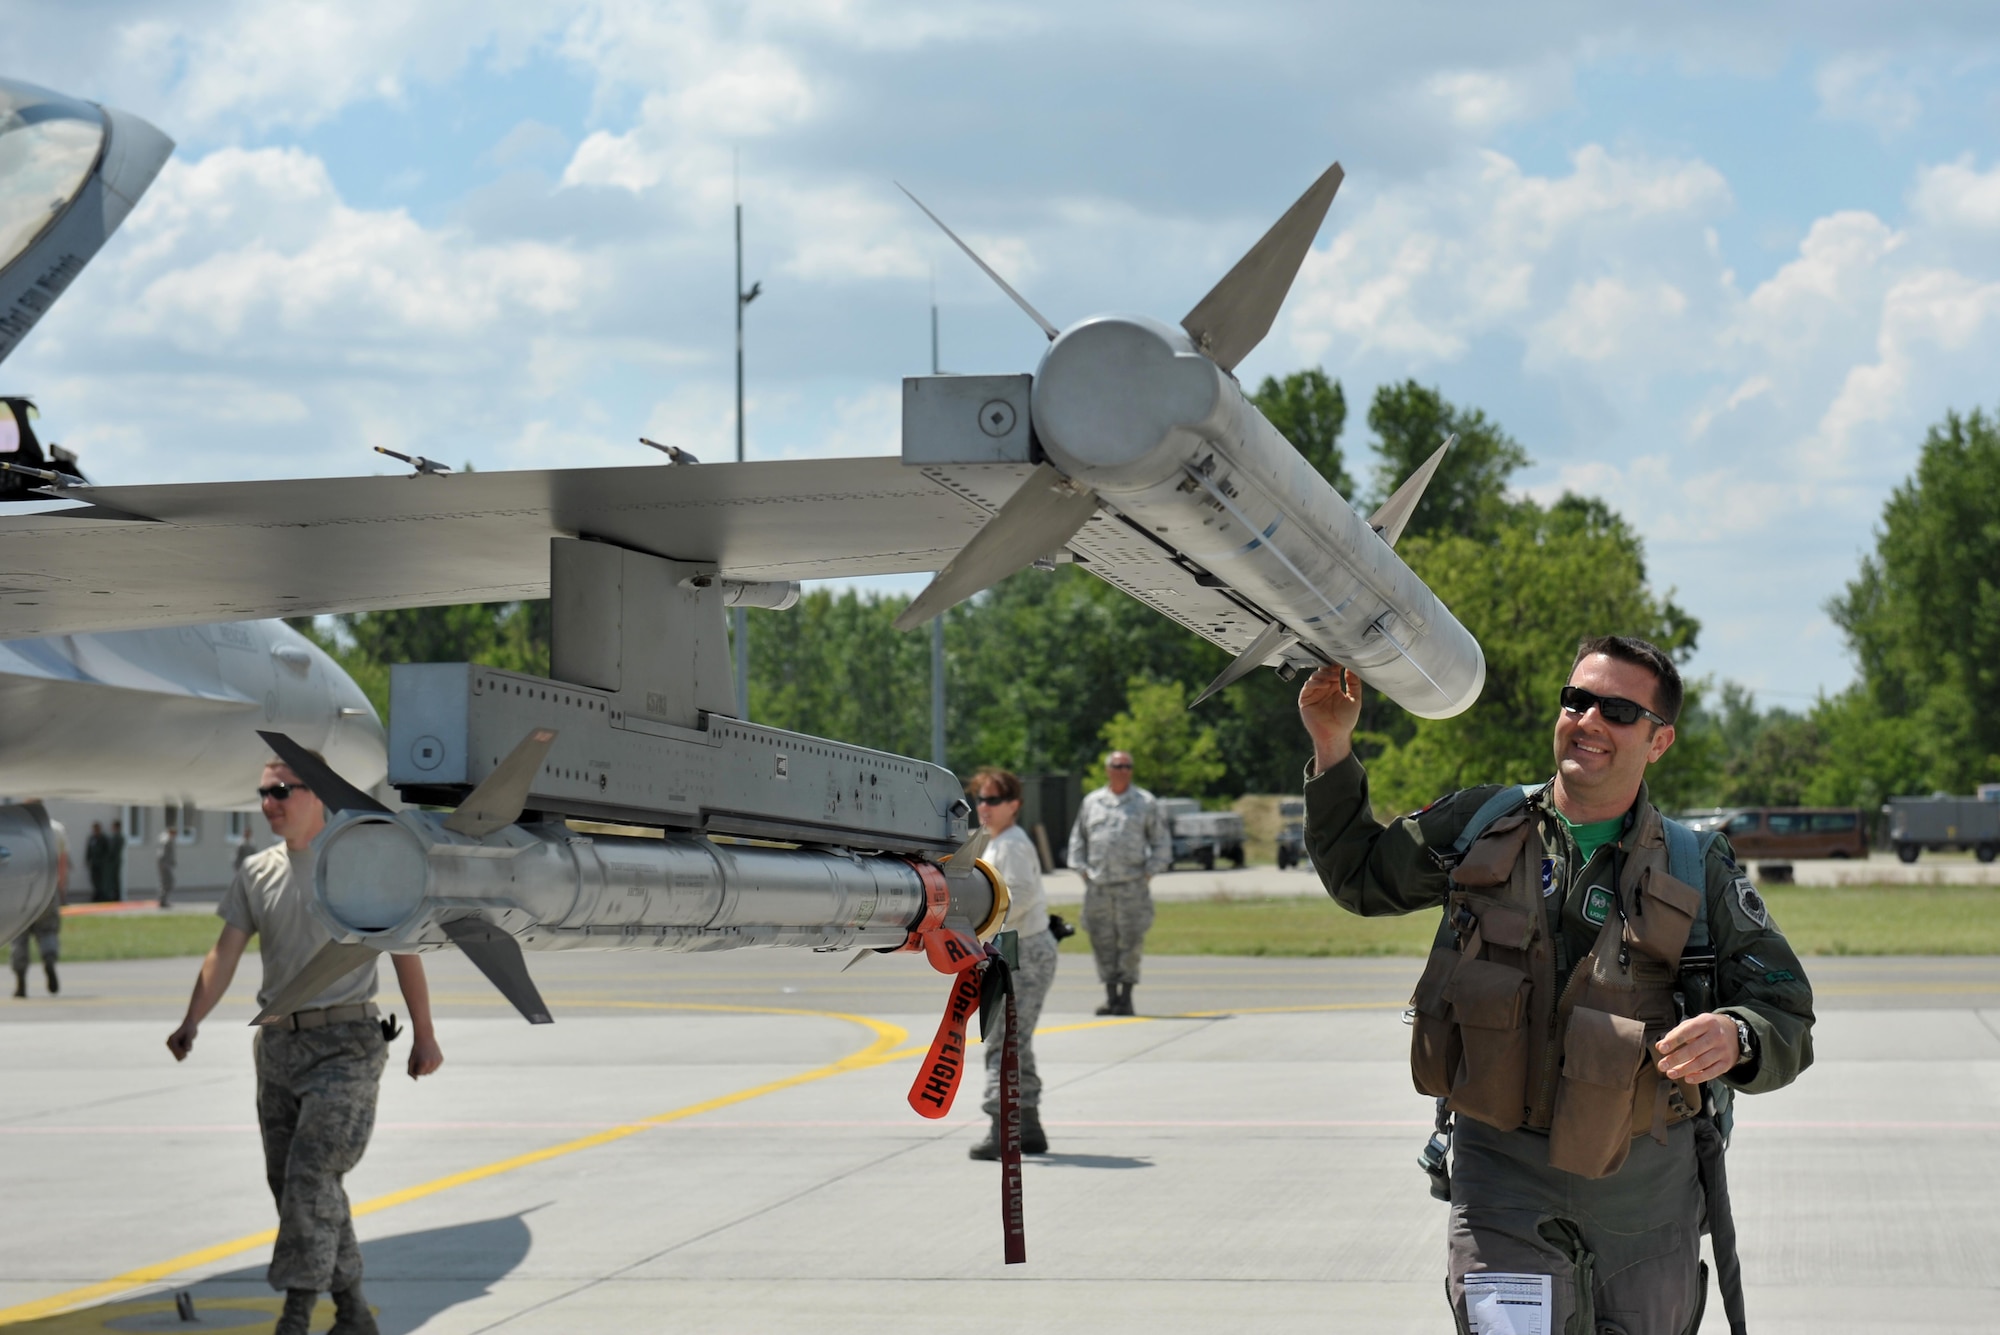 Lt. Col. Gregory Barasch, an F-16 Fighting Falcon pilot assigned to the 180th Fighter Wing, Ohio Air National Guard, conducts a preflight inspection prior to a morning sortie, May 25, 2017, at Kecskemet Air Base in Hungary. Approximately 150 Airmen and eight F-16 fighter jets from the 180FW traveled to the air base to participate in Load Diffuser 17, a two-week Hungarian-led multinational exercise focused on enhancing interoperability capabilities and skills among NATO allied and European partner air forces by conducting joint operations and air defenses to maintain joint readiness, while also bolstering relationships within the U.S. Air National Guard’s State Partnership Program initiatives. Ohio became state partners with Hungary in 1993. Air National Guard photo by Senior Master Sgt. Beth Holliker.